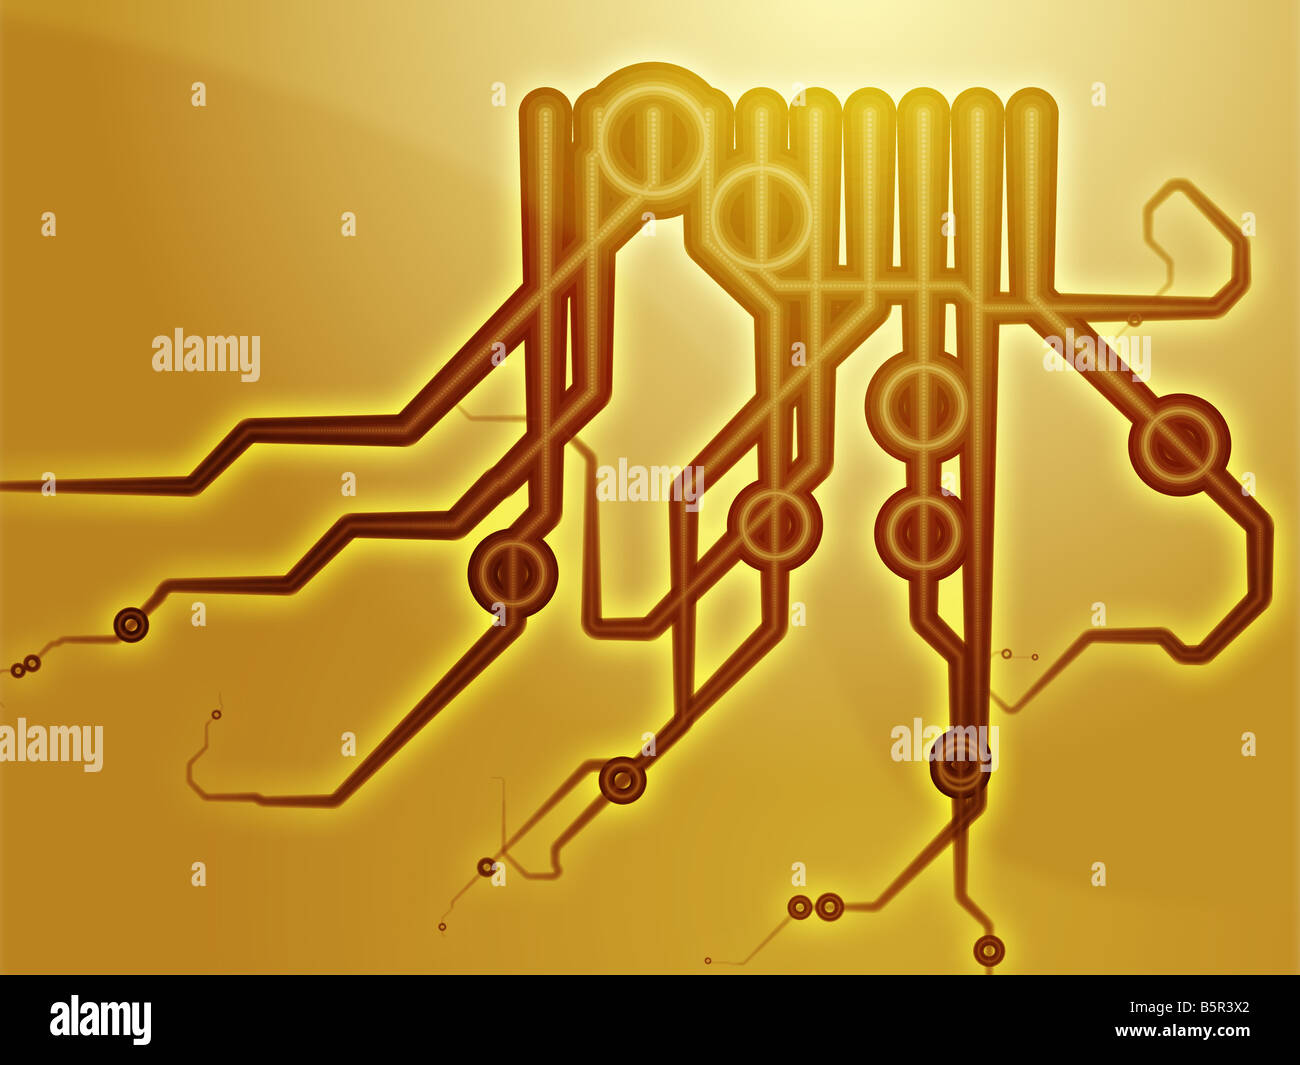 Abstract technical schematic diagram illustration with circuitry and connection Stock Photo